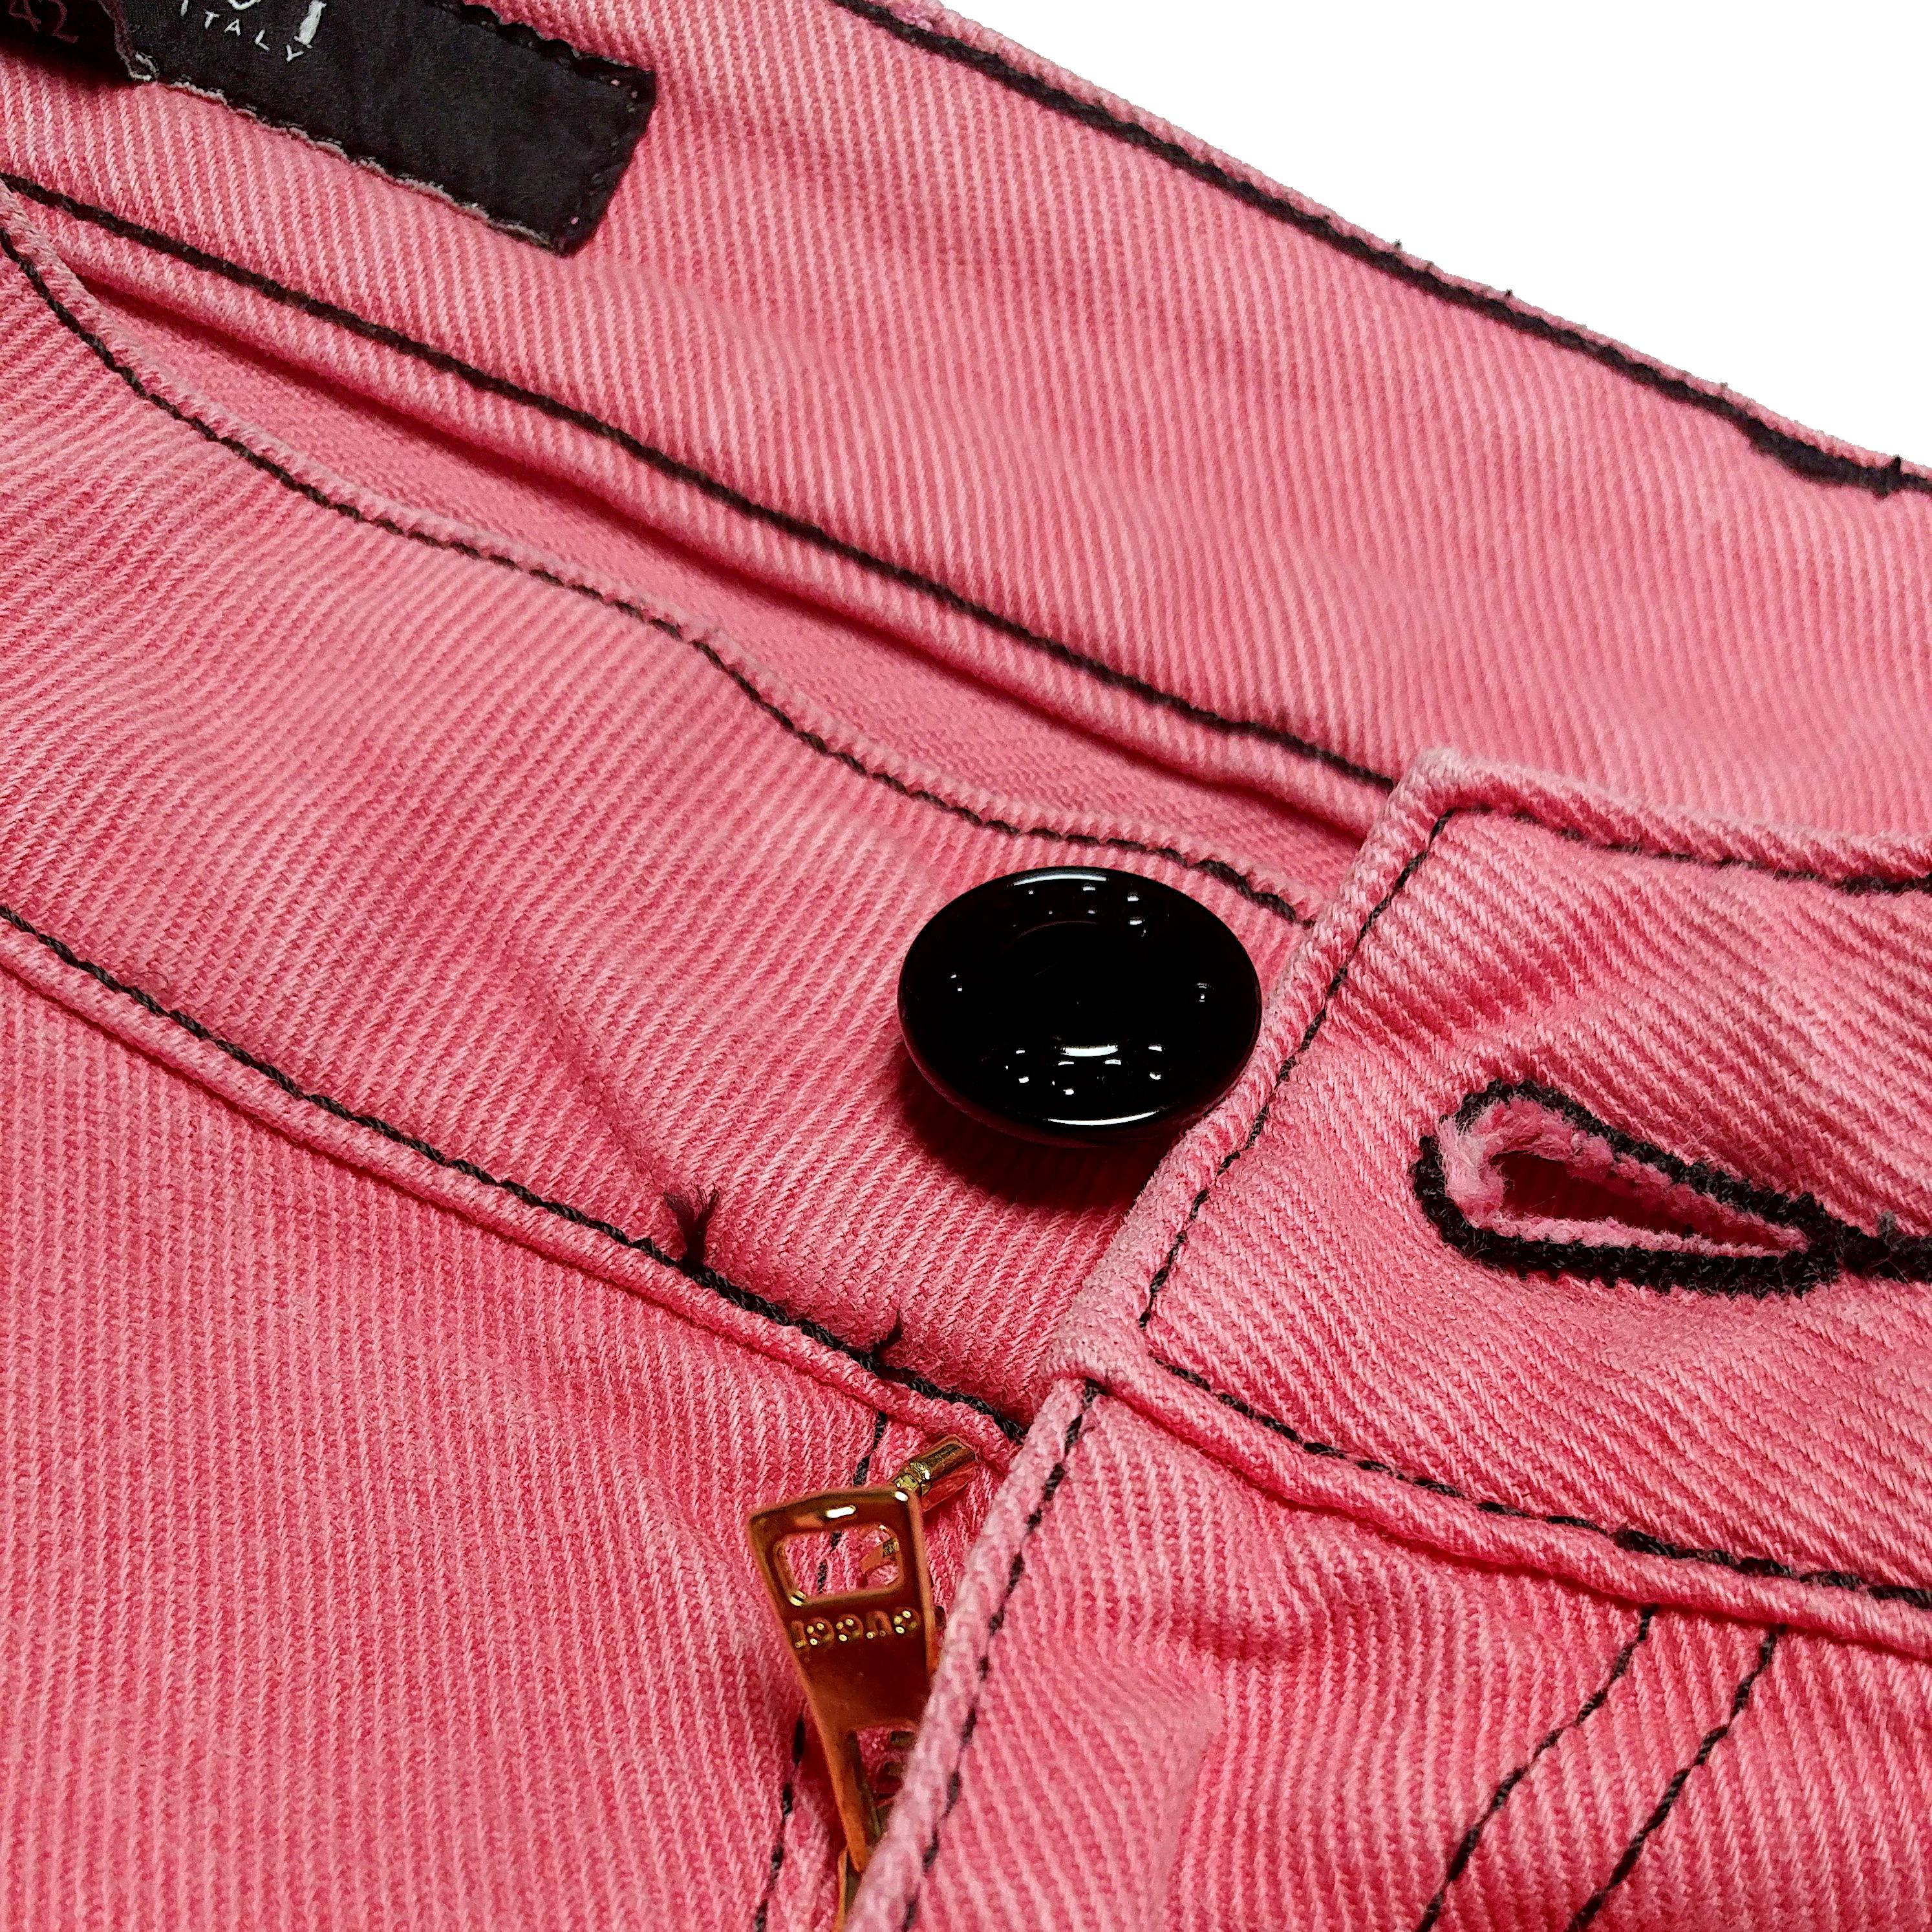 GUCCI - Vintage Pink Jeans with Black Stitchings and Patches  Size 6US 38EU 3